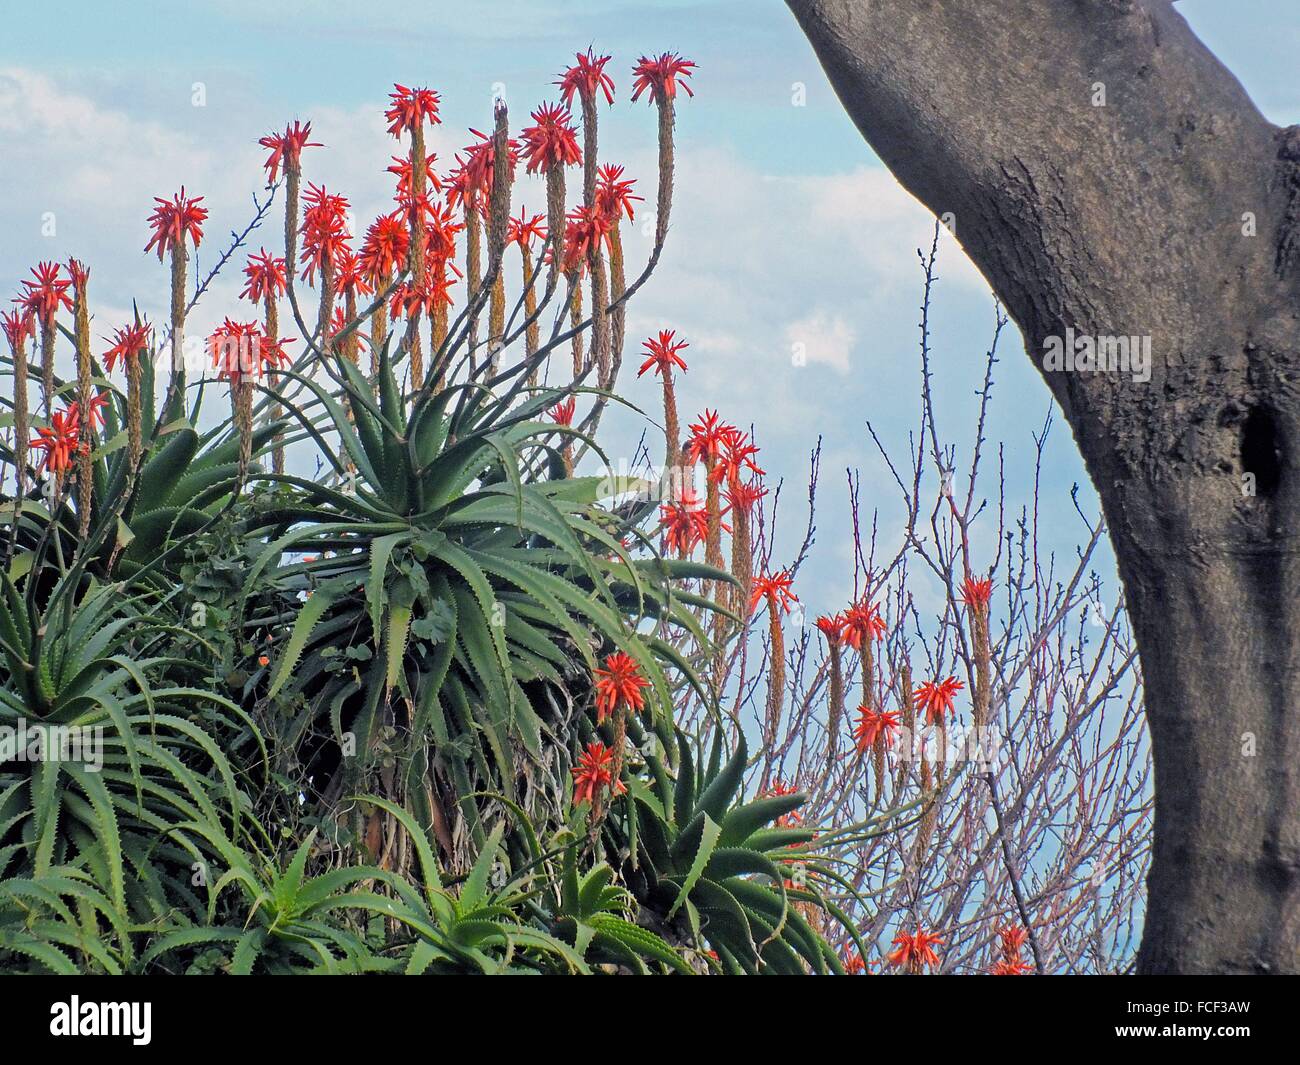 The red flowers of Aloe Vera (Aloe arborescens) and its lush green leaves adorn in February the gardens of Castello Aragonese opposite the island of Ischia. Stock Photo